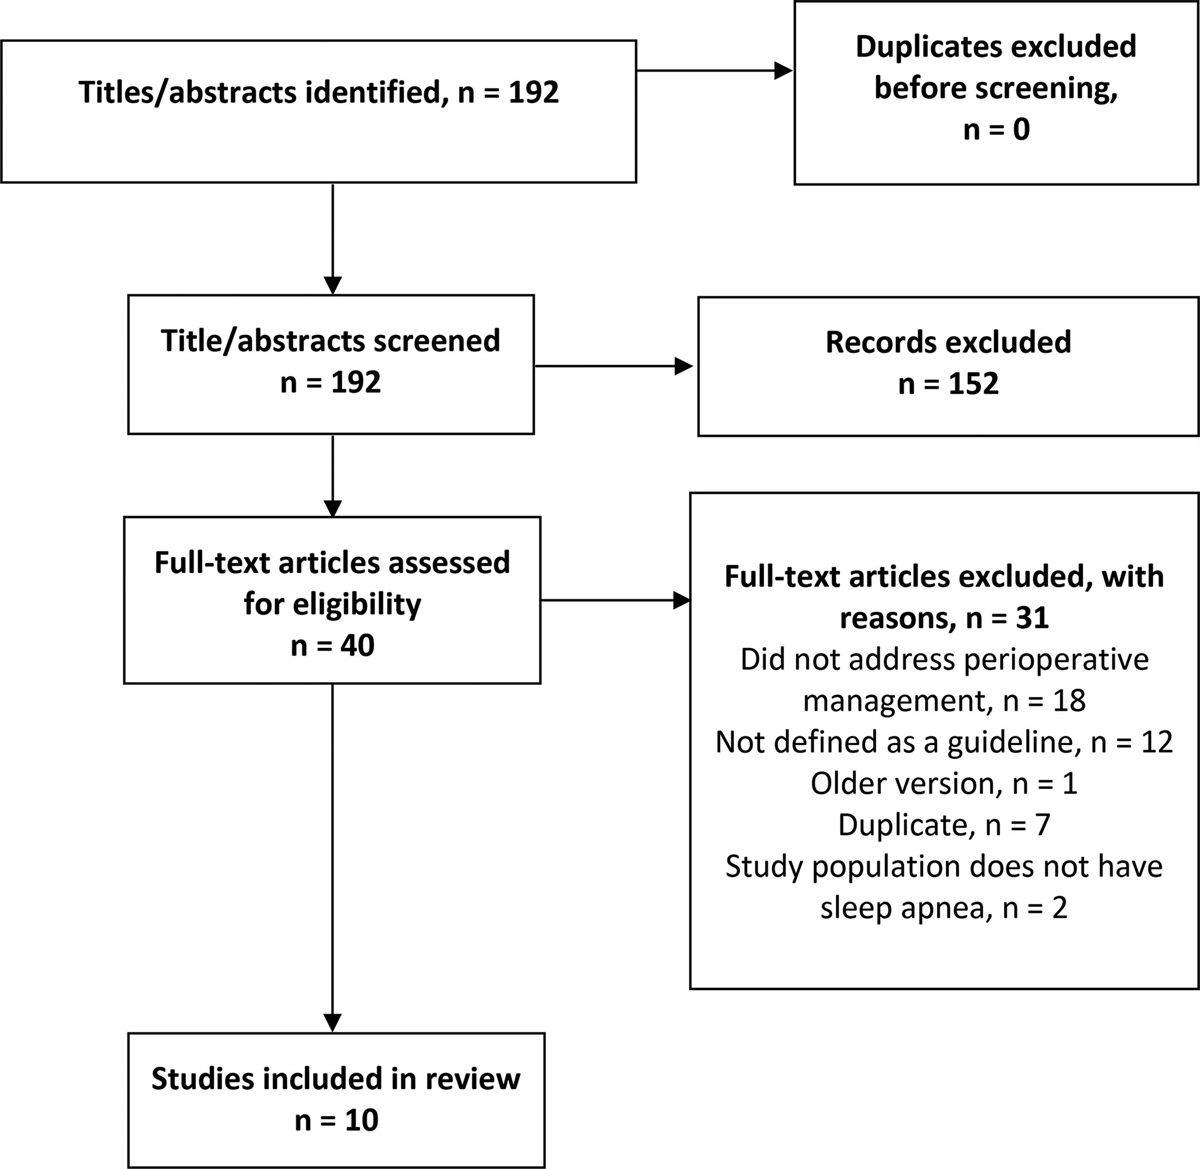 Level of Evidence of Guidelines for Perioperative Management of Patients With Obstructive Sleep Apnea: An Evaluation Using the Appraisal of Guidelines for Research and Evaluation II Tool